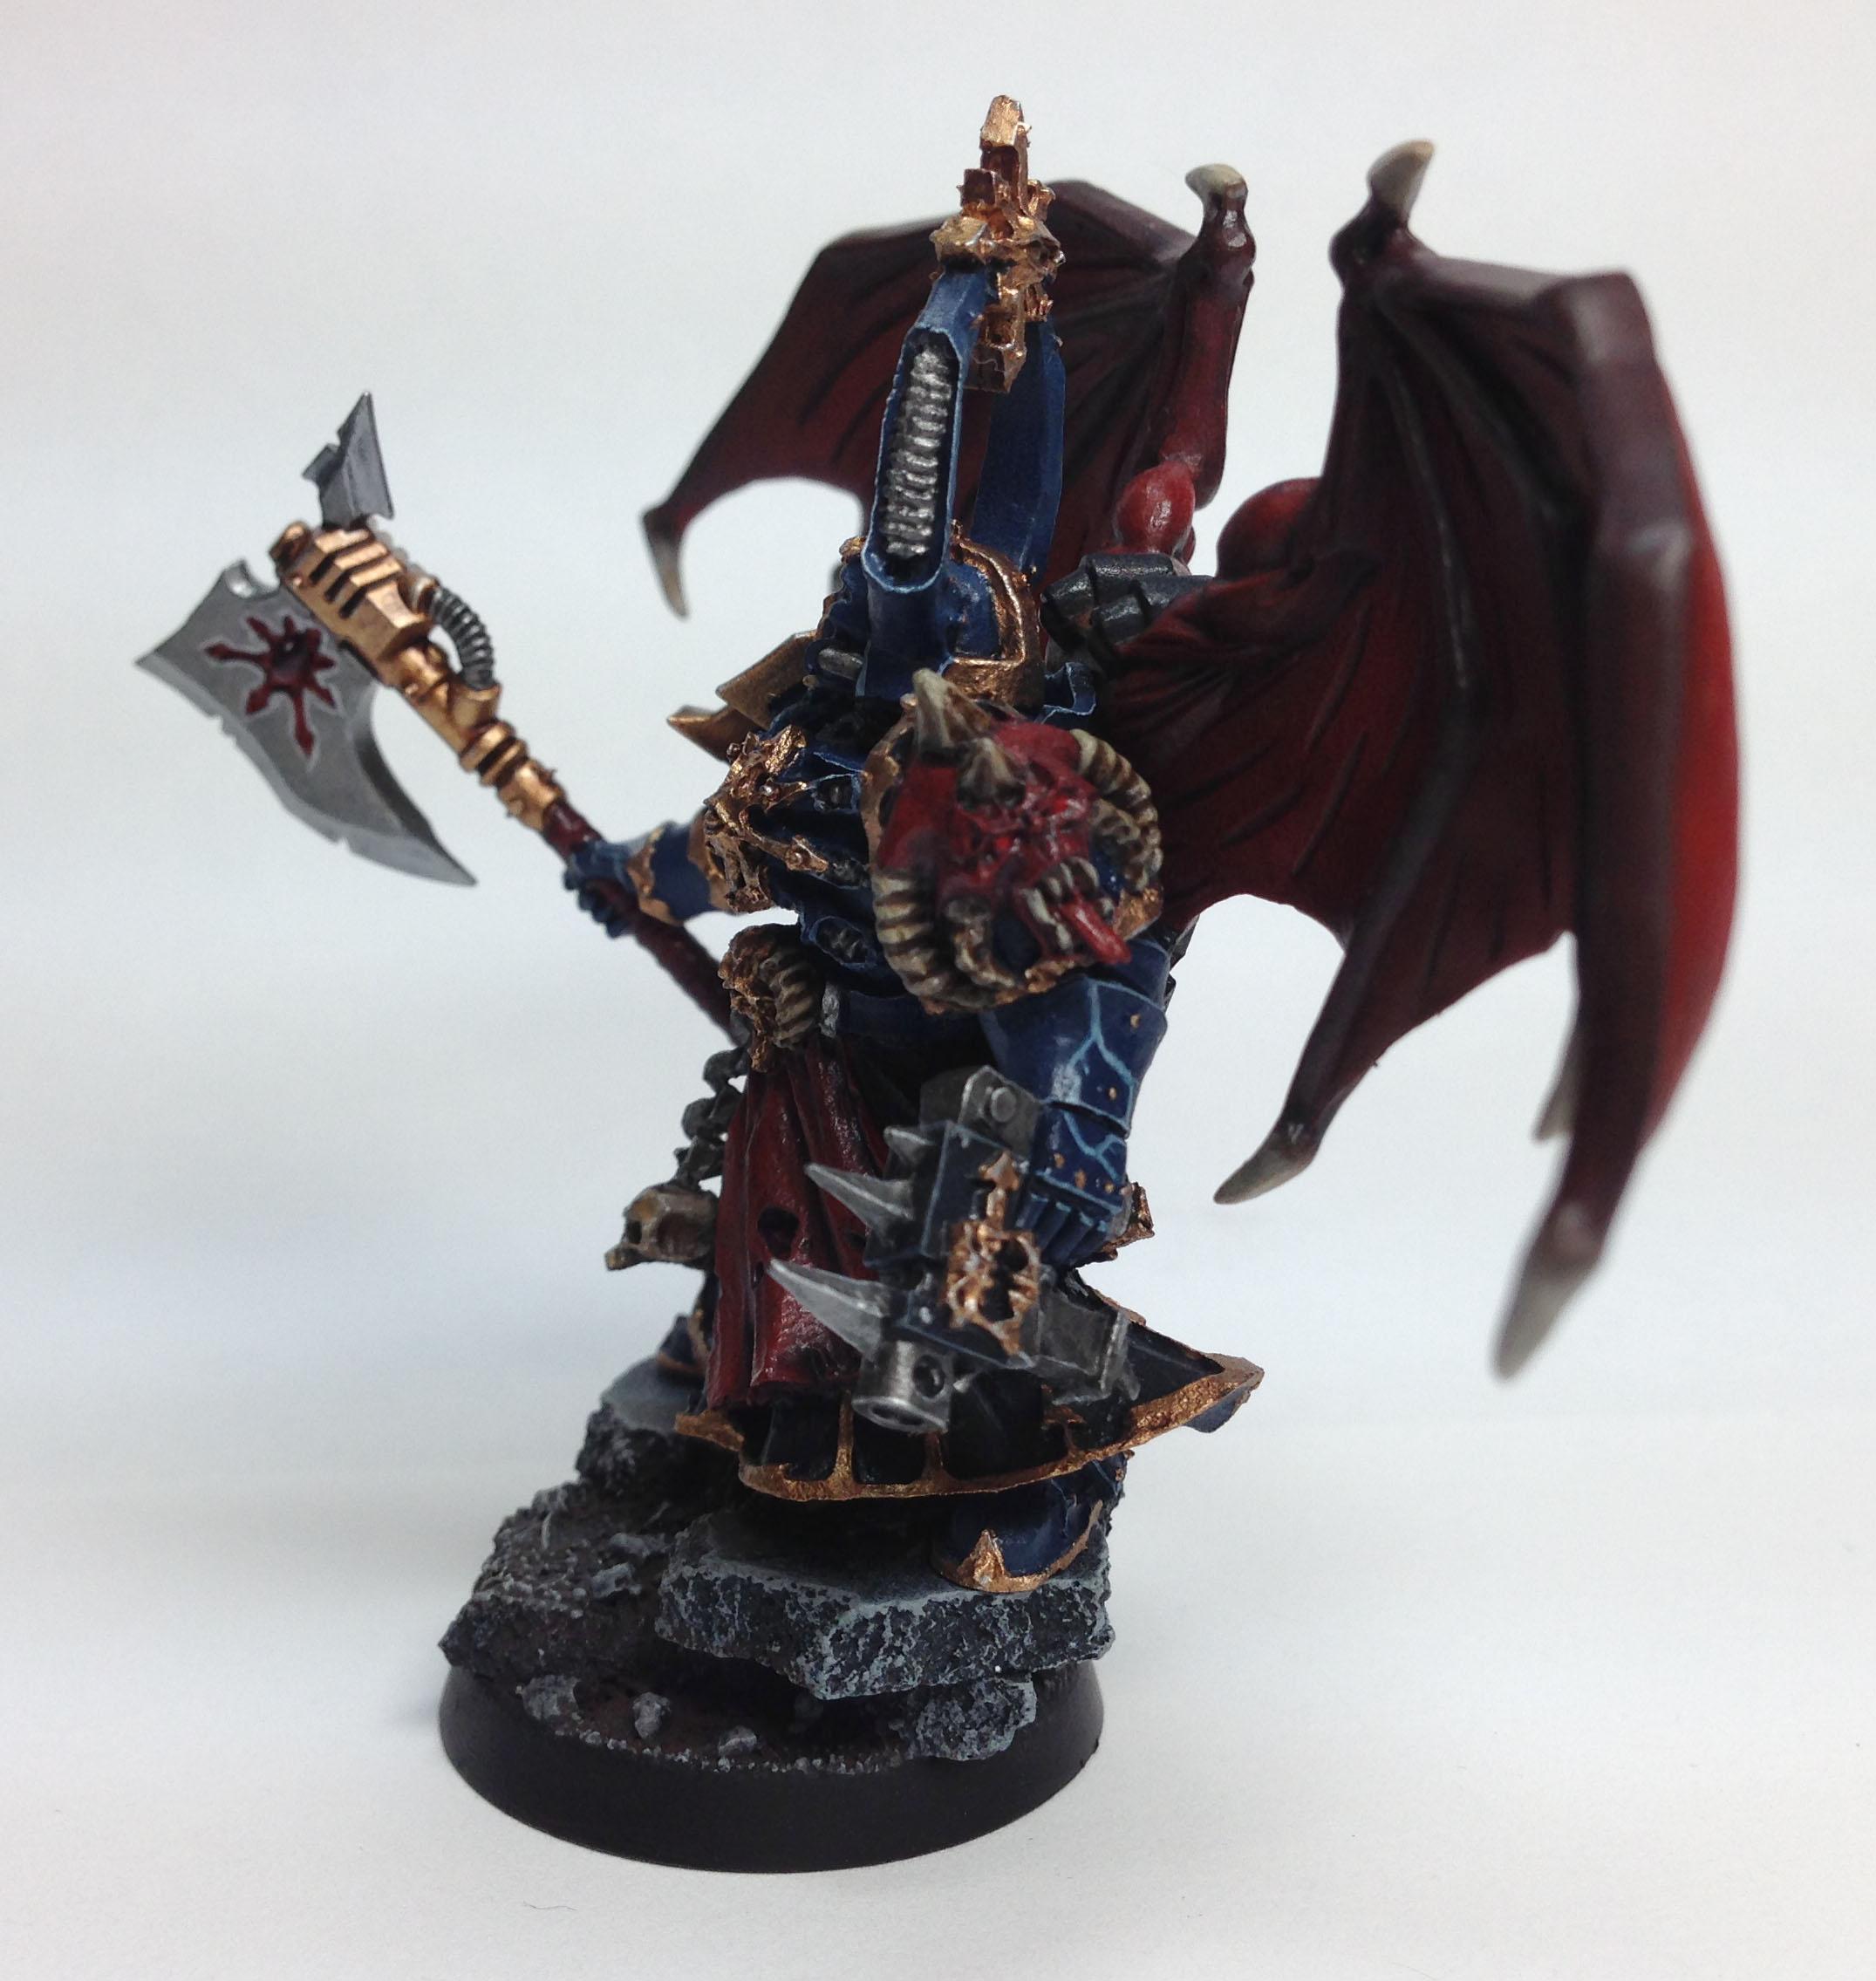 Chaos Lord, Conversion, Finecast, Force Sword, Kitbash, Magnet, Night Lords, Power Axe, Sorcerer